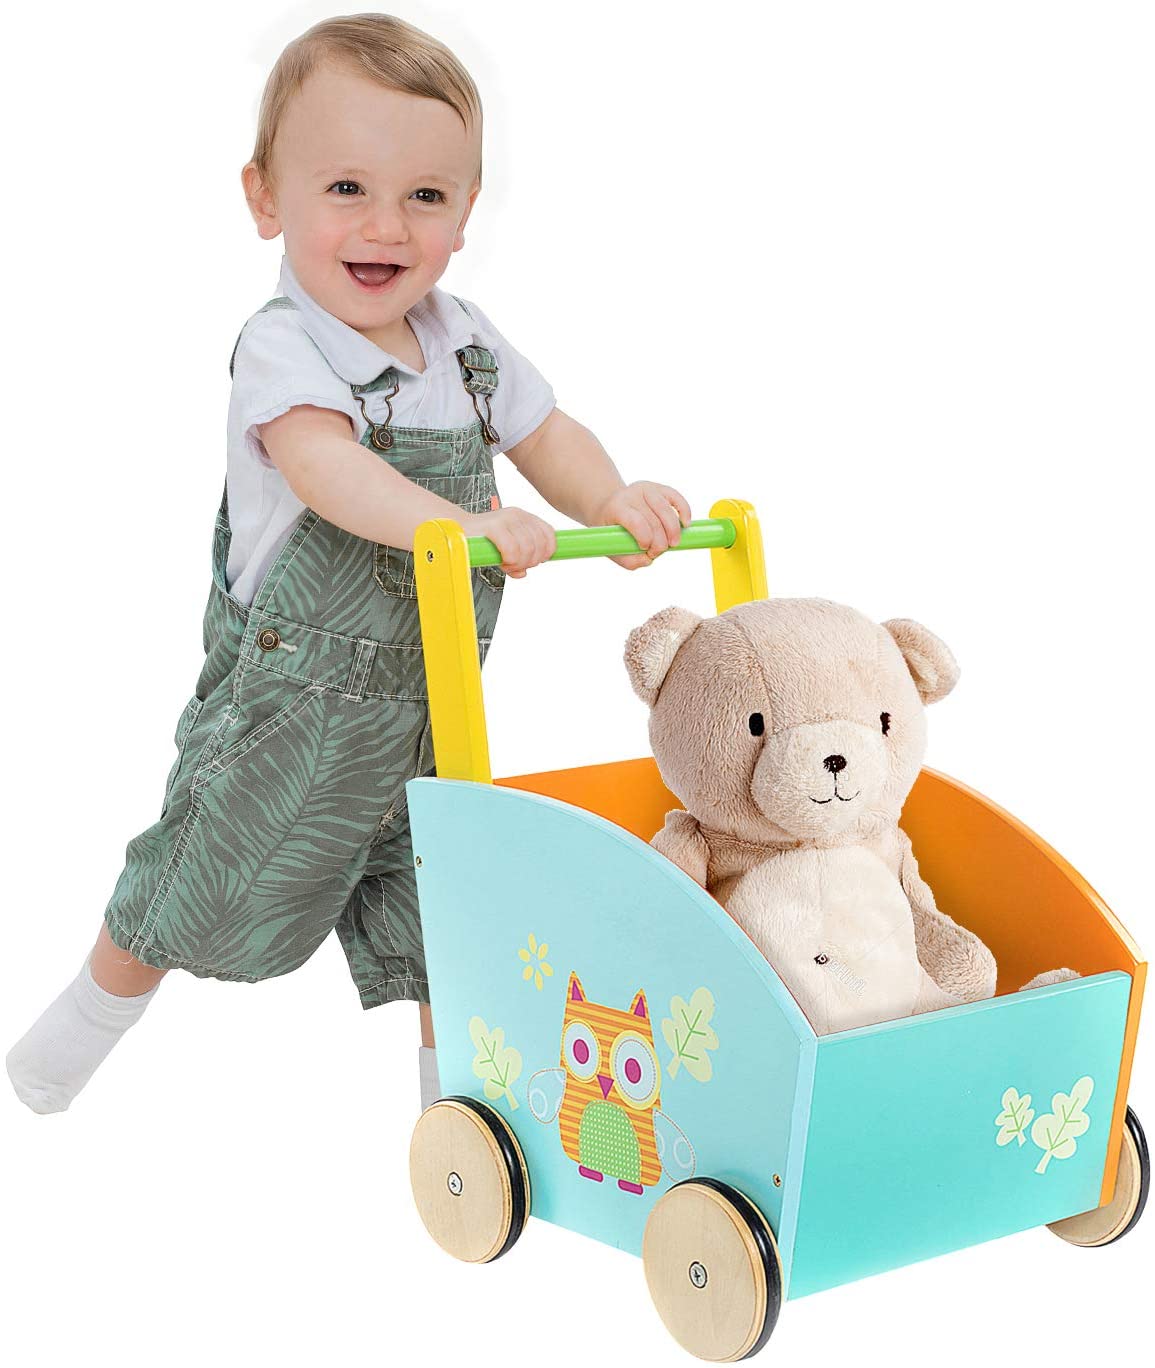 labebe Sit-To-Stand Shopping Cart Certified Safe Toy